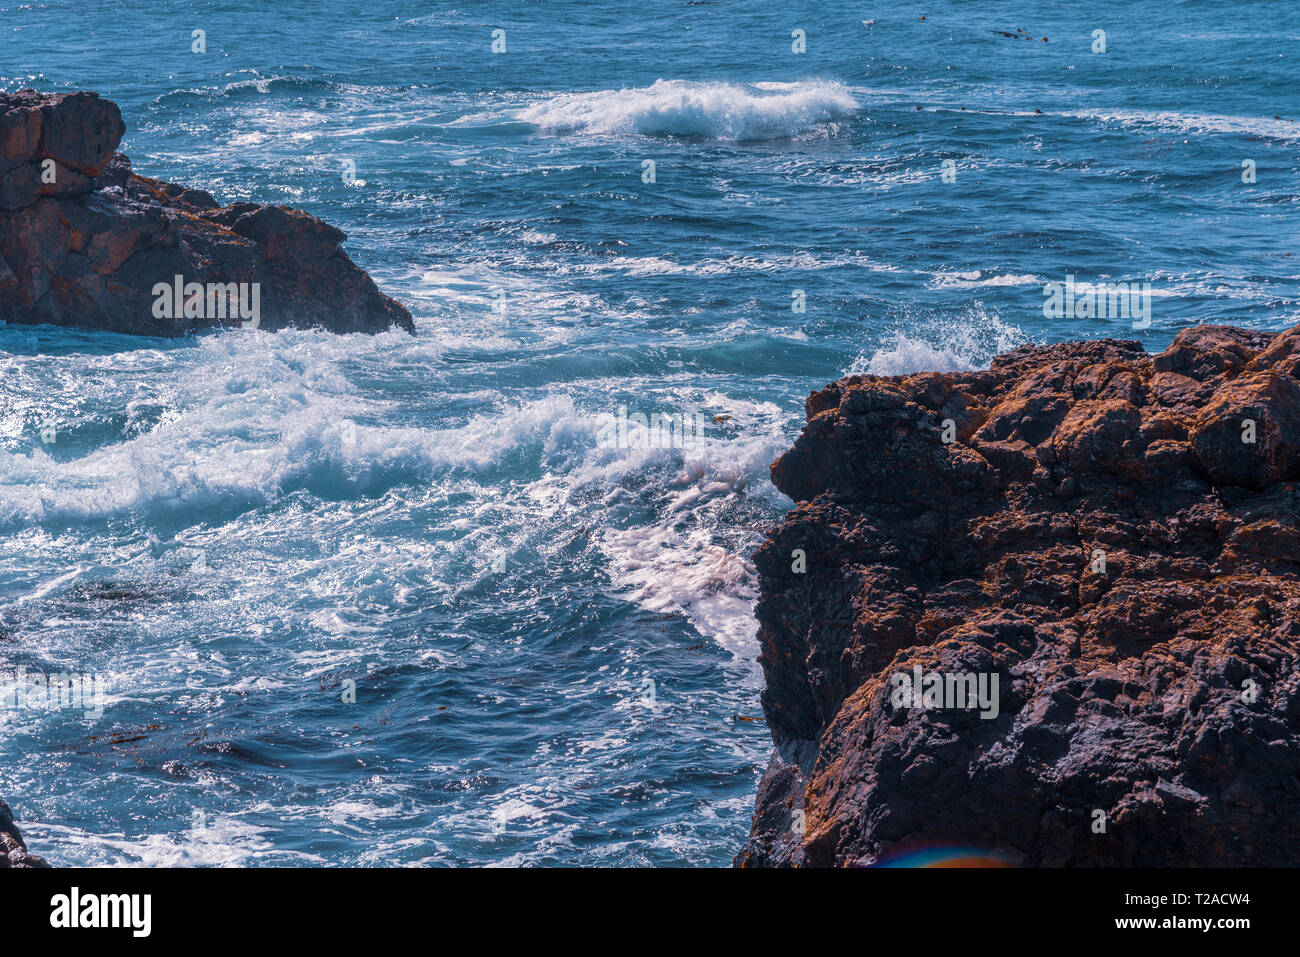 Blue ocean with waves breaking onto rocks. Stock Photo